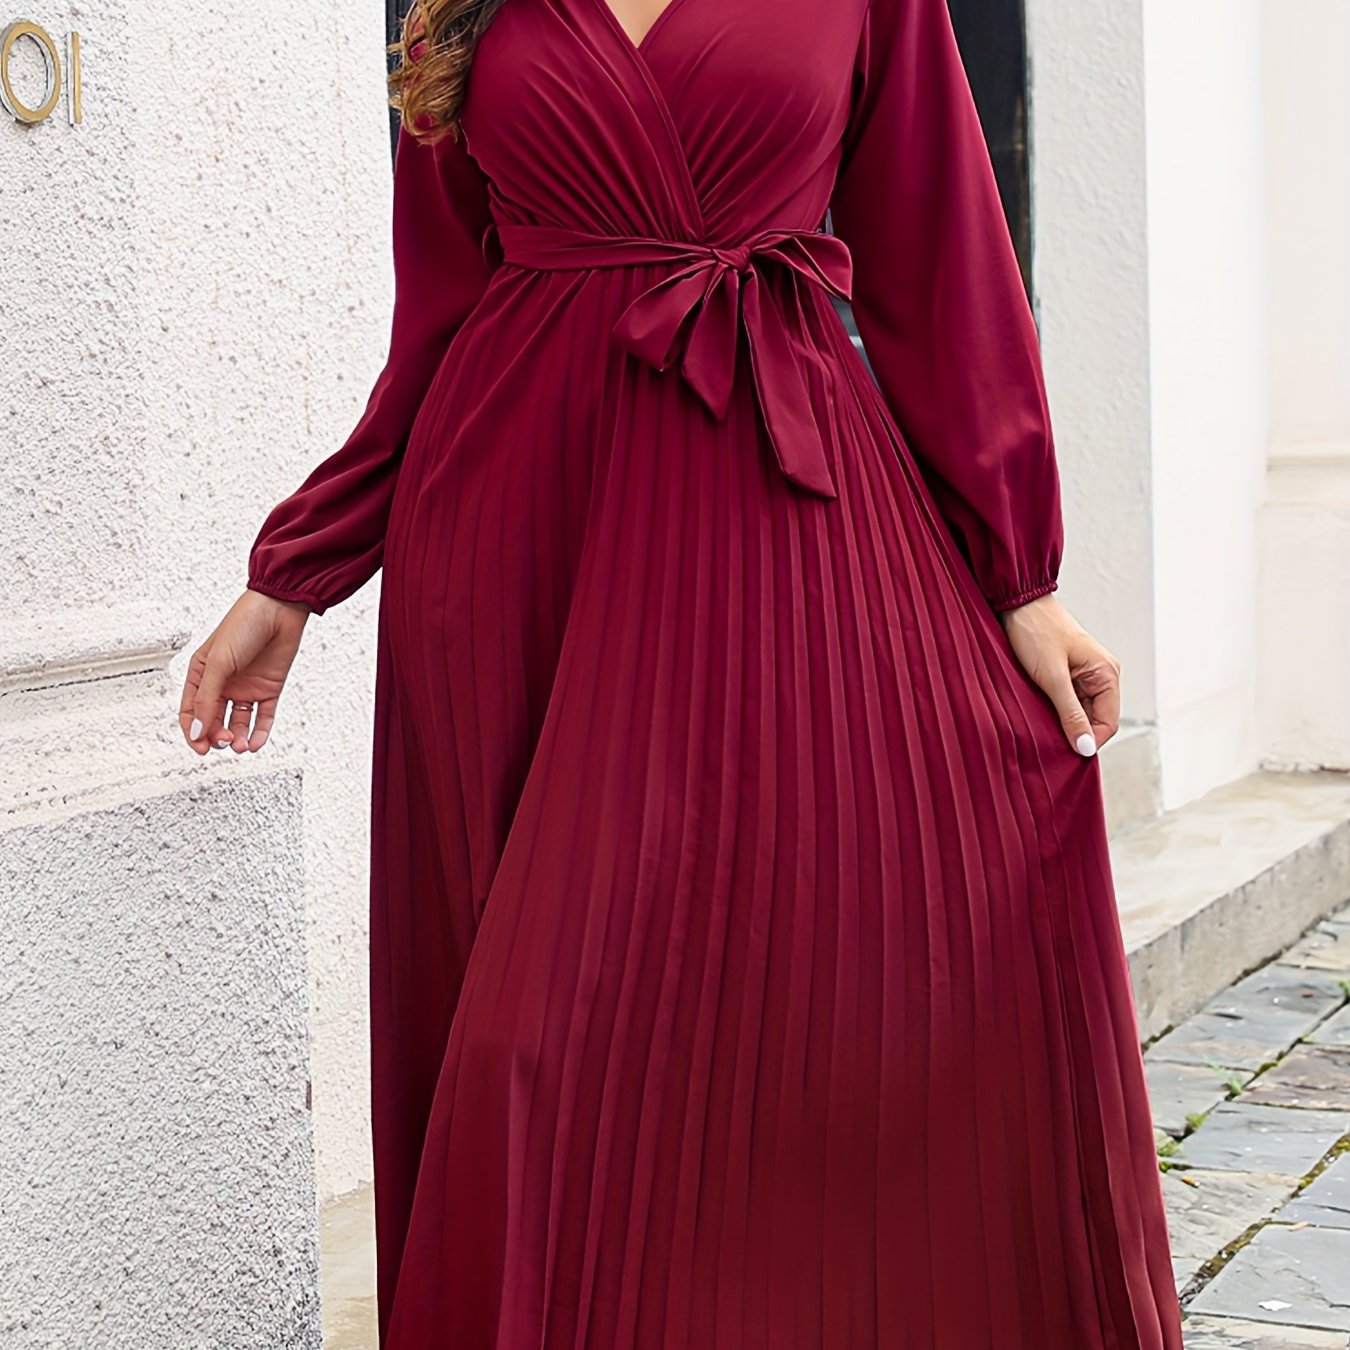 elegant solid v neck belted dress long sleeve ankle dress for party banquet womens clothing